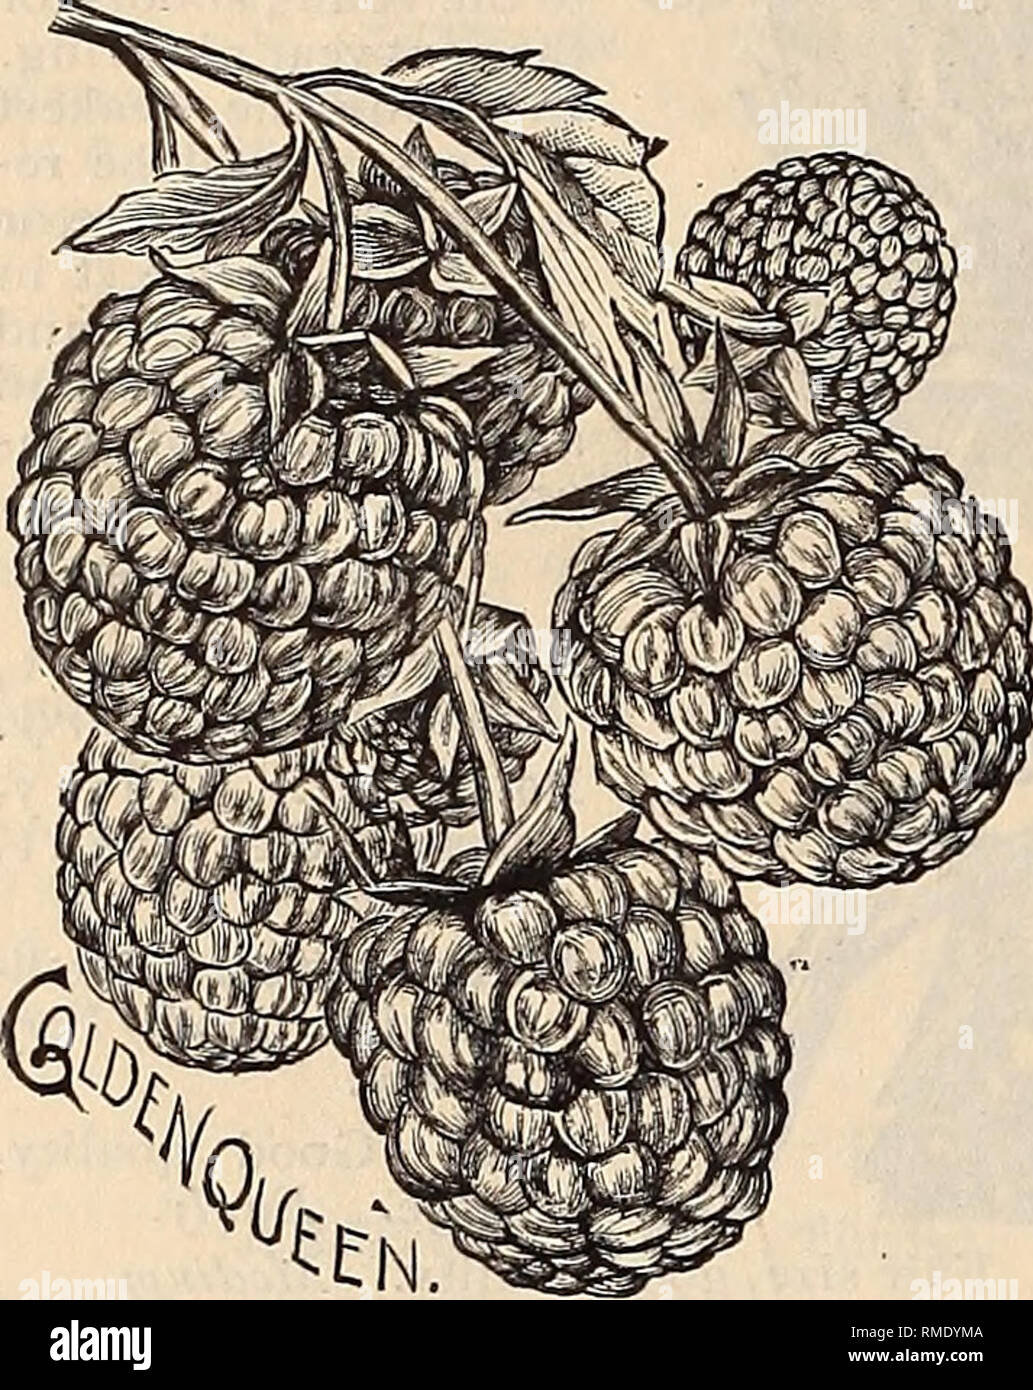 . Annual catalogue of seeds and plants. Nurseries (Horticulture), Minnesota, Catalogs; Vegetables, Seeds, Catalogs; Flowers, Catalogs. 96 SCHLEGEL ^ FOTTEER'S SEED CATALOGUE. GRAPES, Foreign Varieties. For Growing Under Glass. 1.00 and 1.50 each. BLACK. Alicante. Very large, fine qualitv. Black Hamburg. The best for general use. Gros Colman. Very large, sweet and juicj. Madresfield Court. Large, rich muscat flavor.. WHITE. Bowood. Large, with a sweet muscat flavor. Golden Chasselas. Large, excellent sort. — Hamburg. Large bunches, one of the best. Muscat of Alexandria. A delicious variety. • R Stock Photo